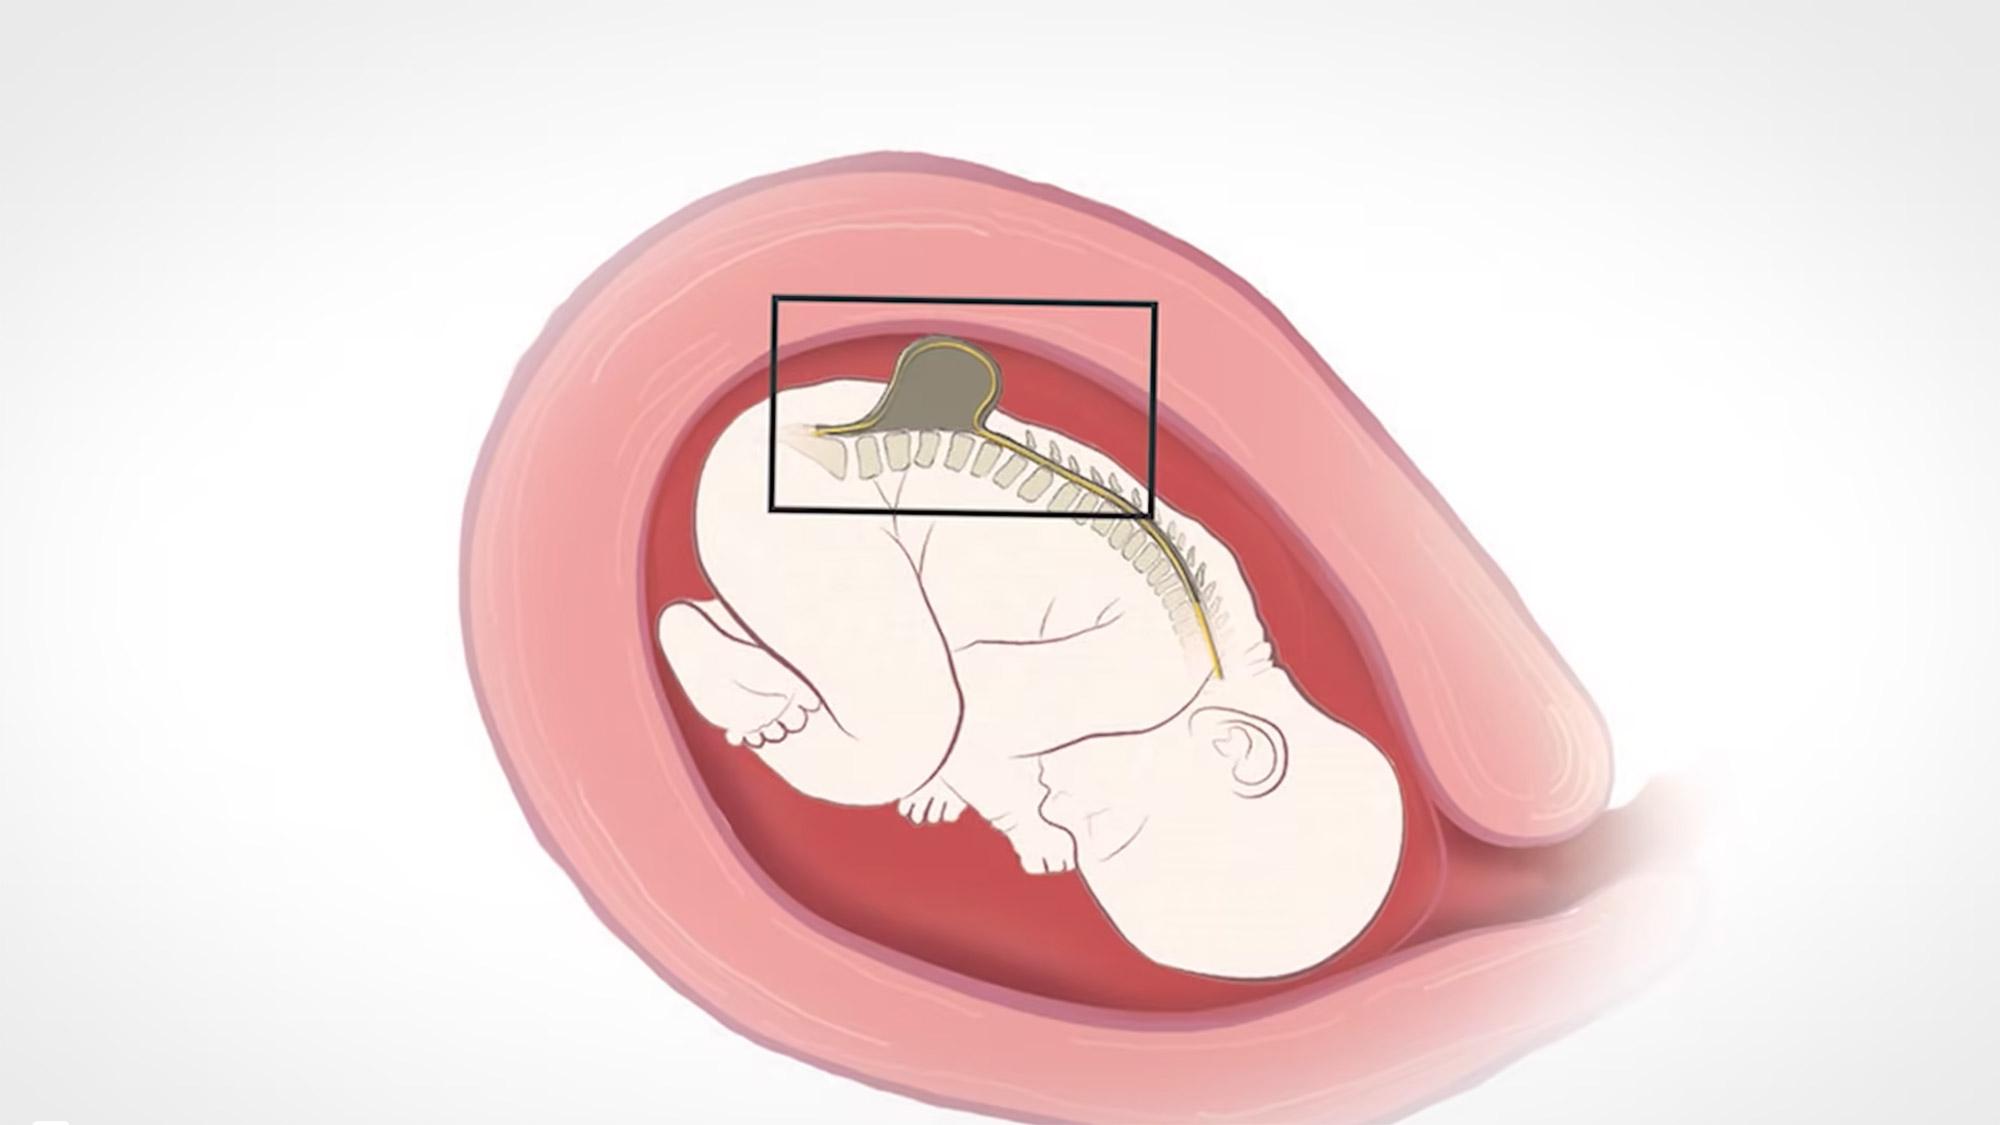 An illustration showing the development of Spina Bifida in the womb